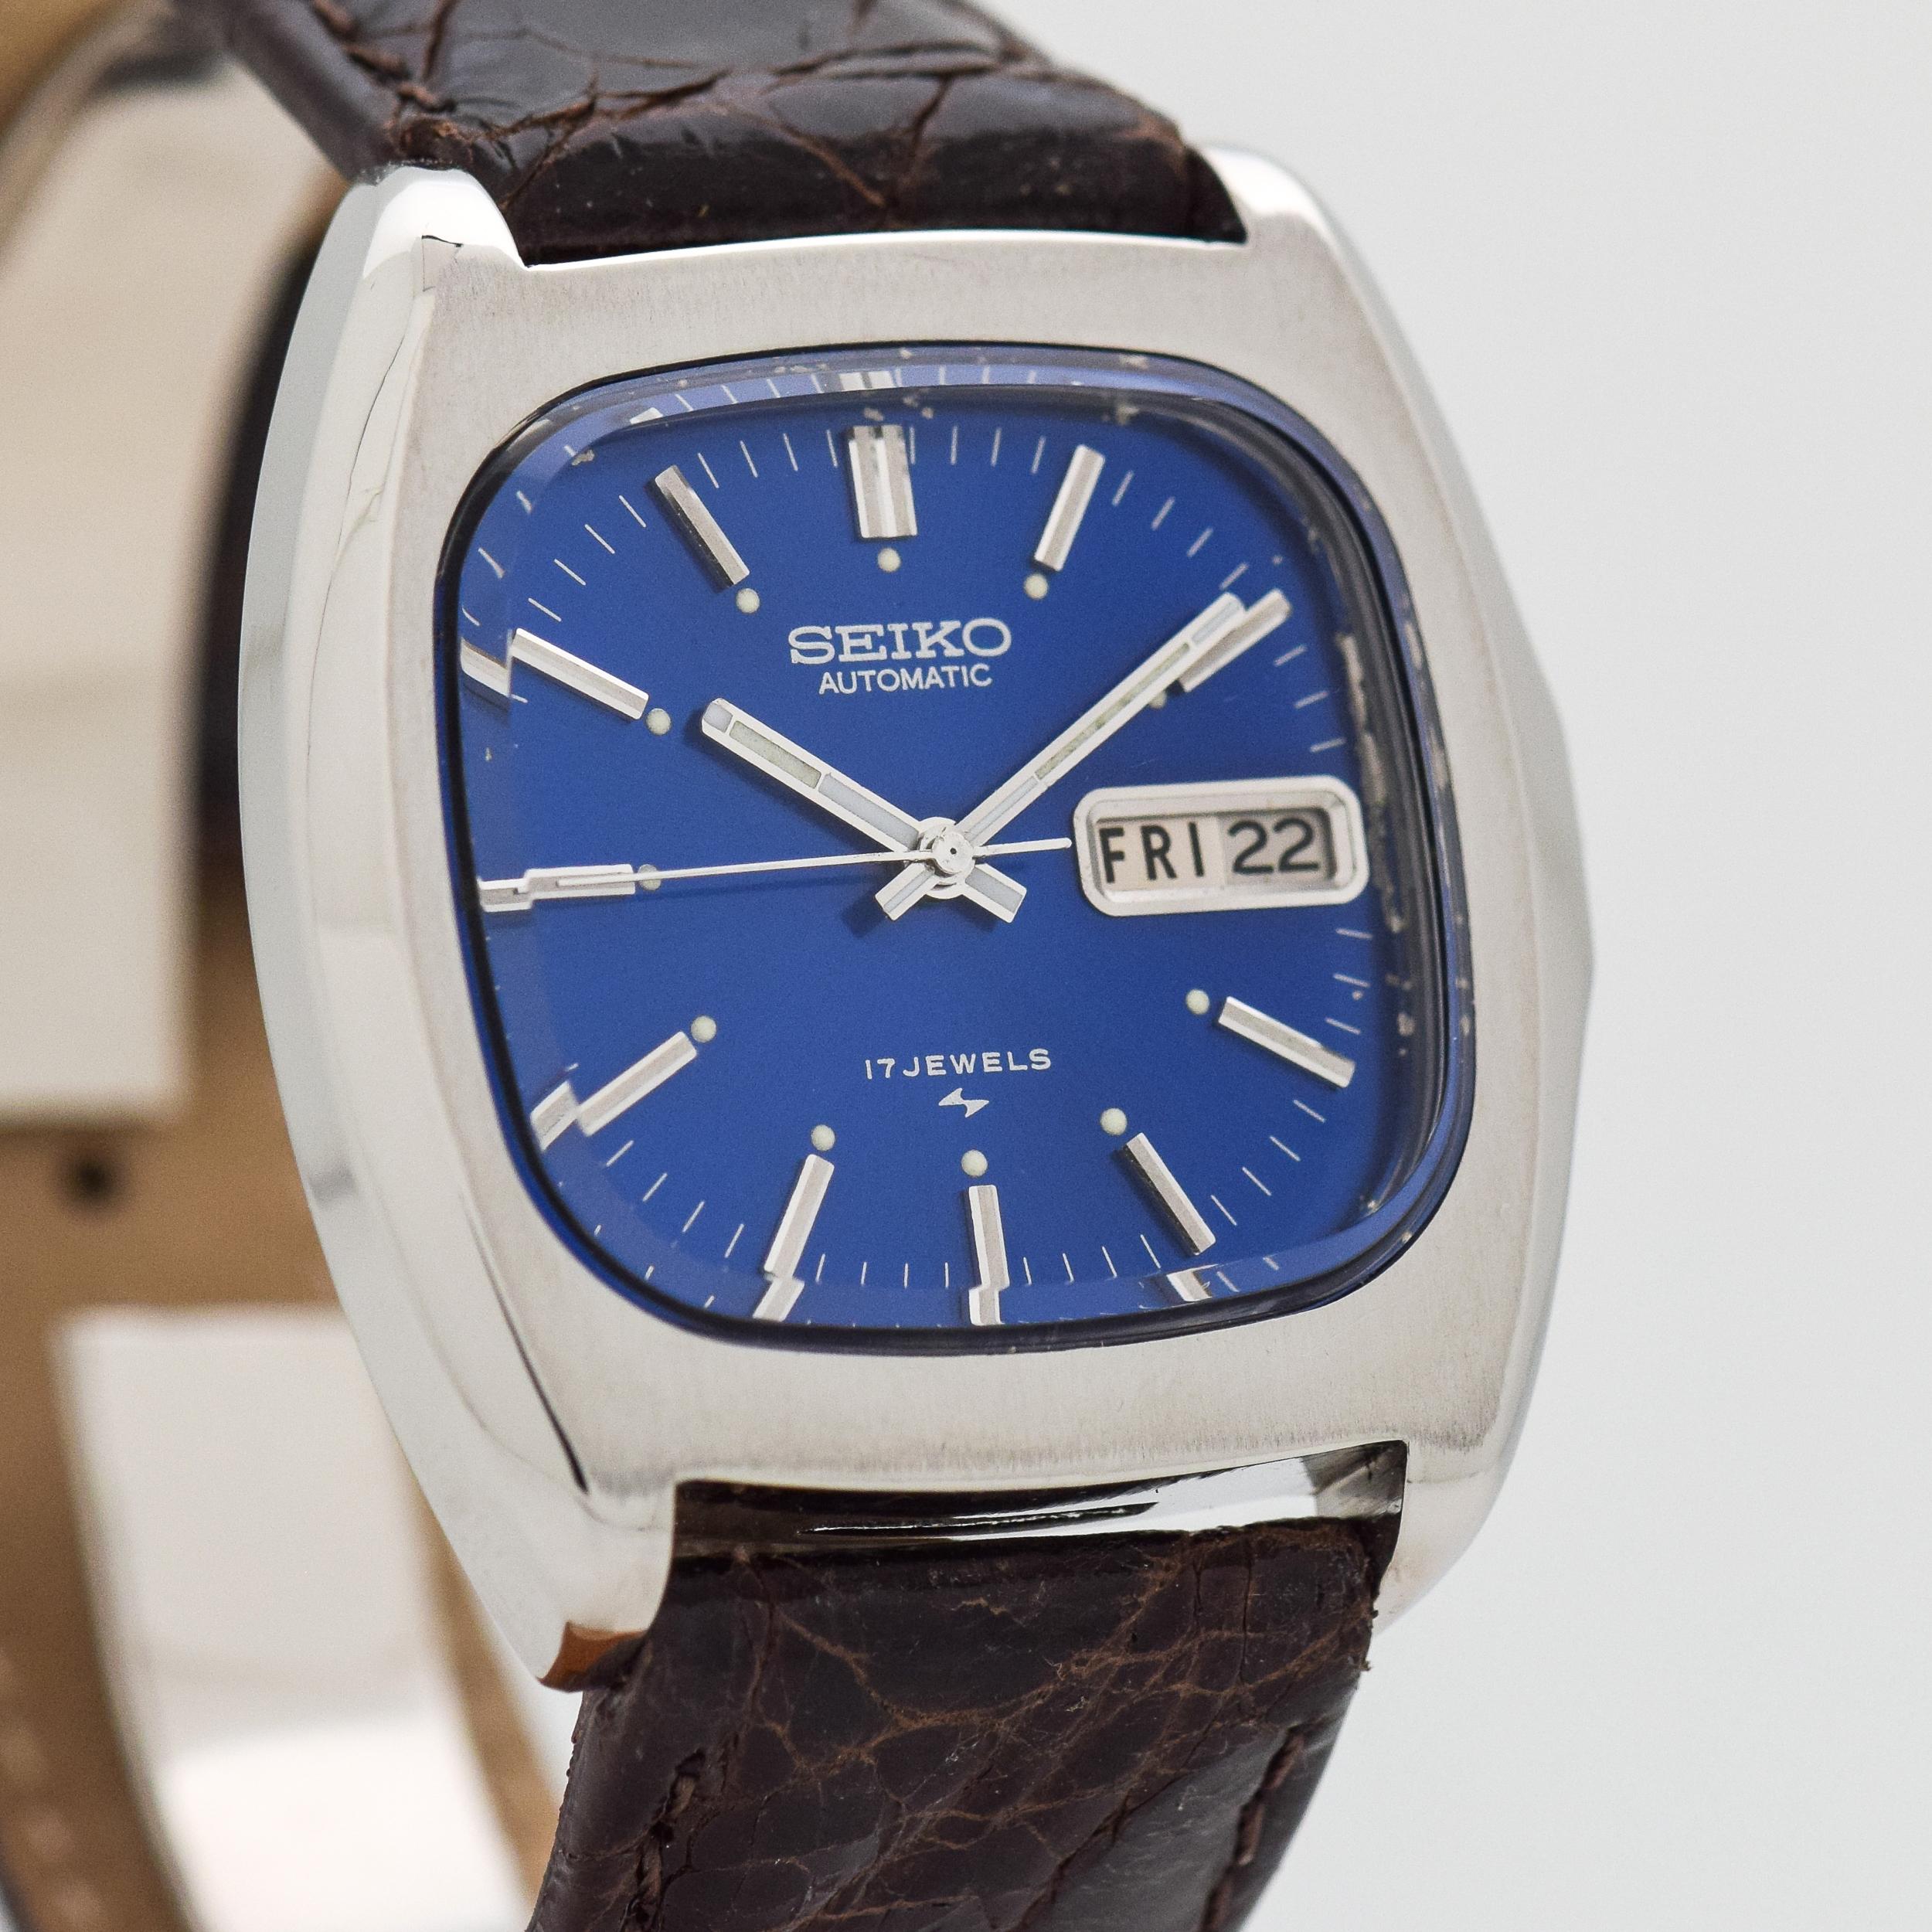 1972 Vintage Seiko Day - Date Ref. 7006-5019 Stainless Steel Watch with Original Blue Dial with Applied Steel Stick/Bar/Baton Markers. 38mm x 40mm lug to lug (1.5 in. x 1.57 in.) - 17 jewel, automatic caliber movement. Equipped with a 100% Genuine